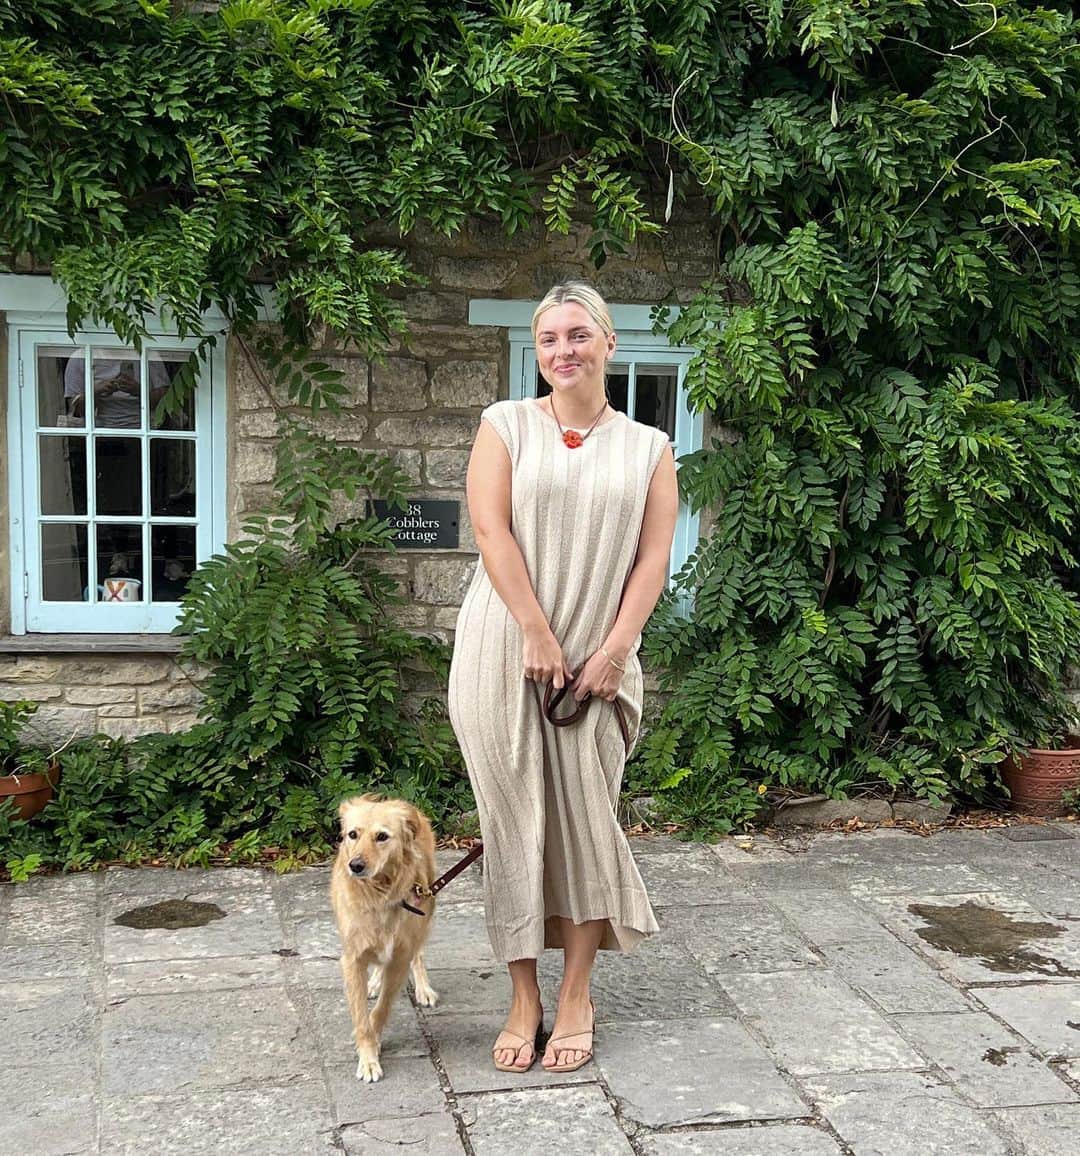 Estée Lalondeのインスタグラム：「🐕 HAPPY INTERNATIONAL DOG DAY 🐕  In honour of today, and for the fourth year in a row, Free People will be donating to @wild_at_heart_foundation who work tirelessly to compassionately reduce the 600 million global stray dog population via sterilisation, education and welfare initiatives.  For every comment made on this post TODAY, Free People will donate £1 to WAHF. Now is your chance to help them and all the pups in need around the world - just like @esteelalonde and her good gal WAHF Greek rescue Effie!  Please get commenting below! 🐾」